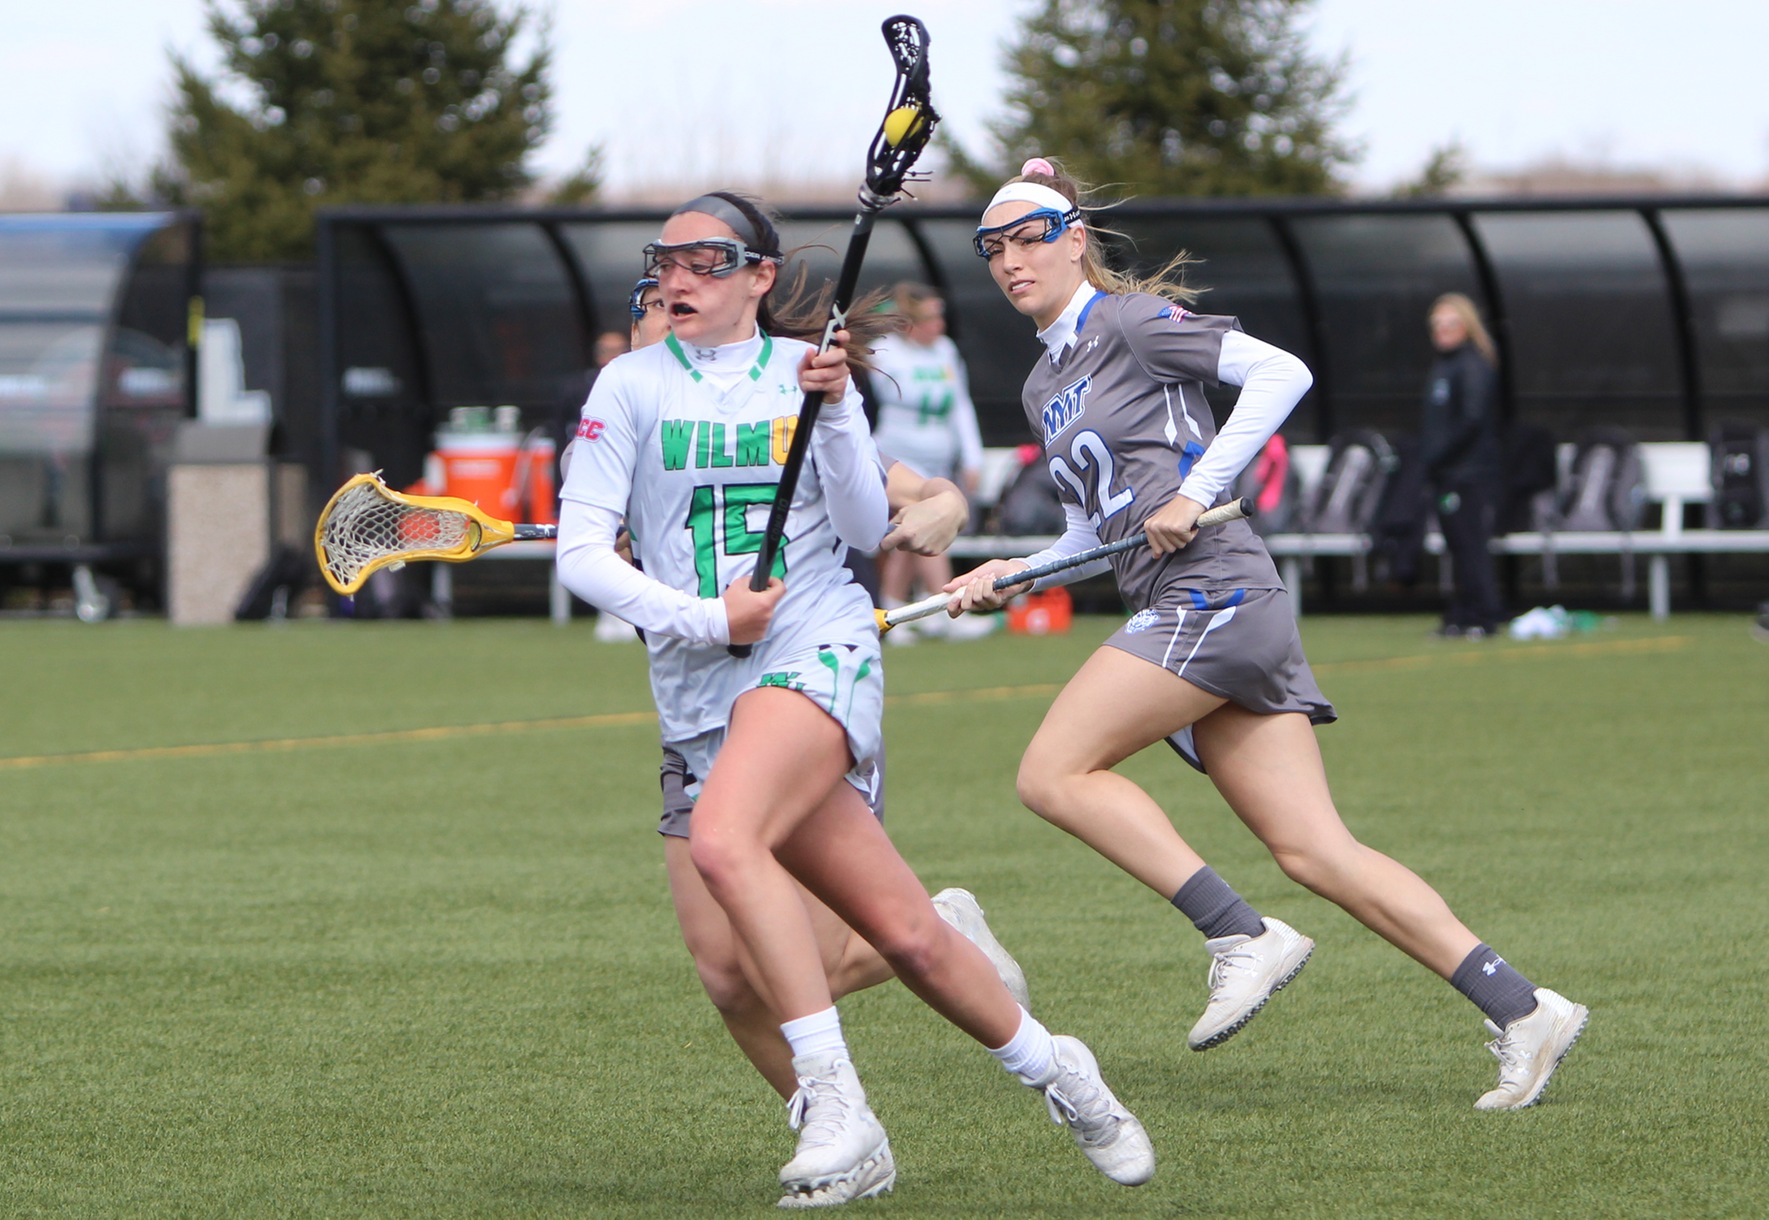 Copyright 2019; Wilmington University. All rights reserved. File photo of Brooke Siebert who helped lead the Wildcats with three goals, five ground balls, five draws, and three caused turnovers at Dominican. Photo by Samantha Kelley. March 16, 2019 vs. #22 NYIT.